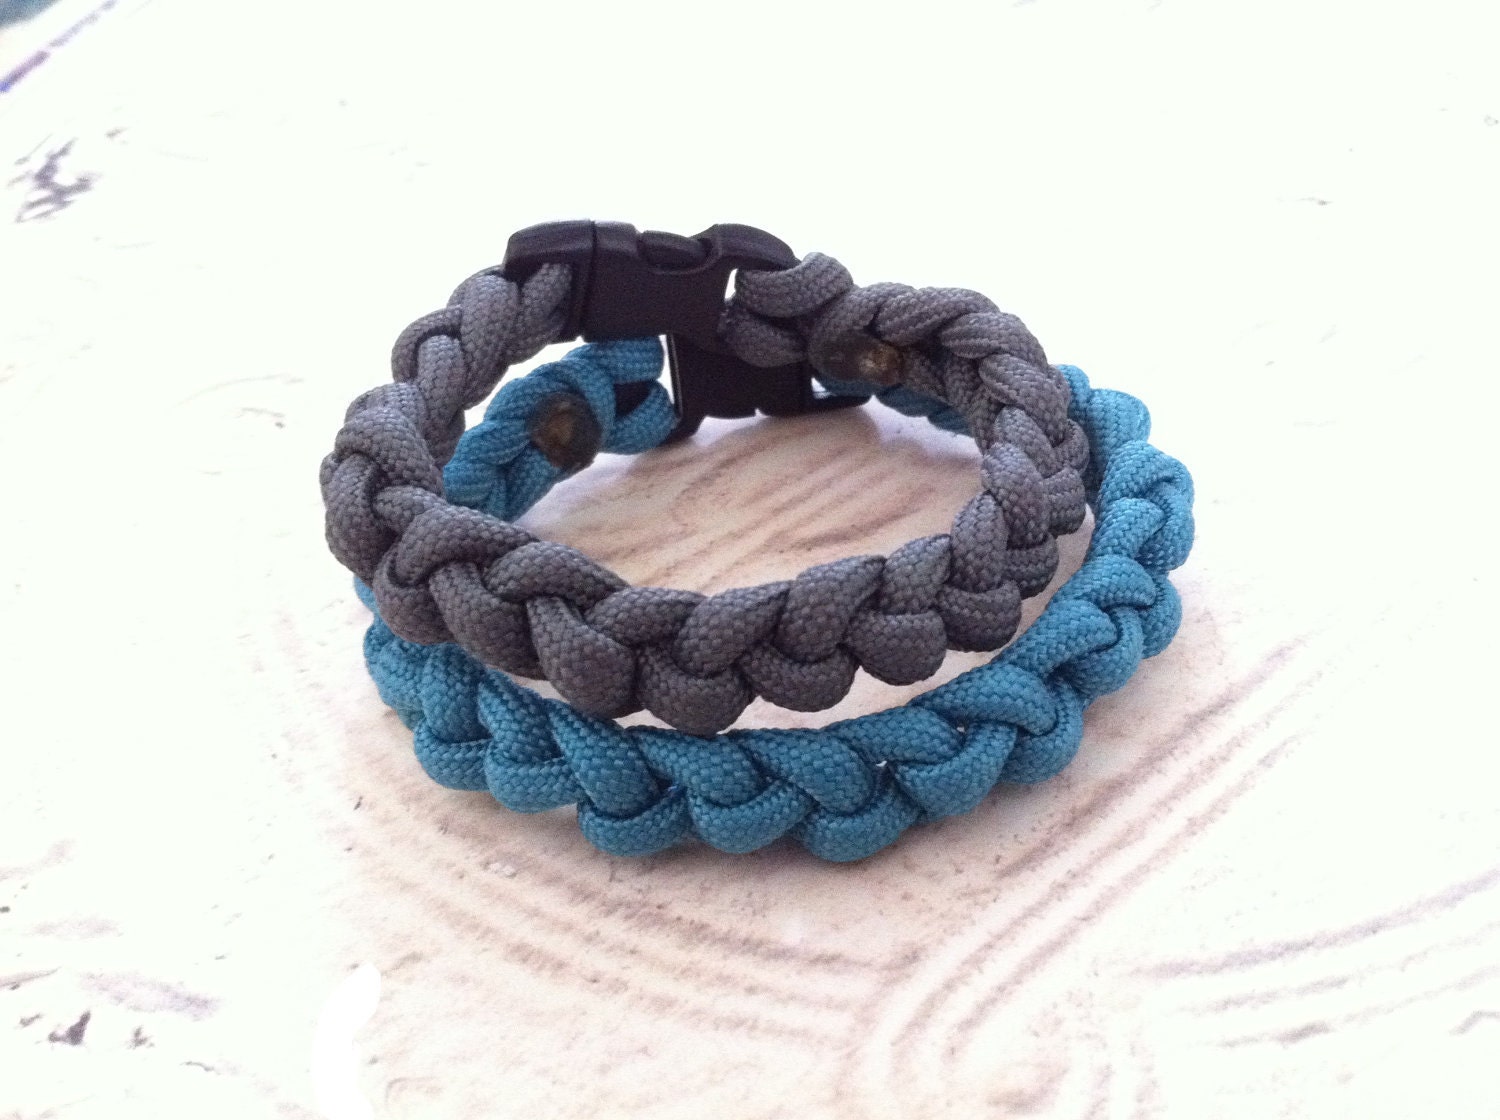 Grey and Blue Bracelets, Set of 2 Handwoven Bracelets, Handmade Paracord Survival Jewelry with Small Black Buckle - RuleNo15